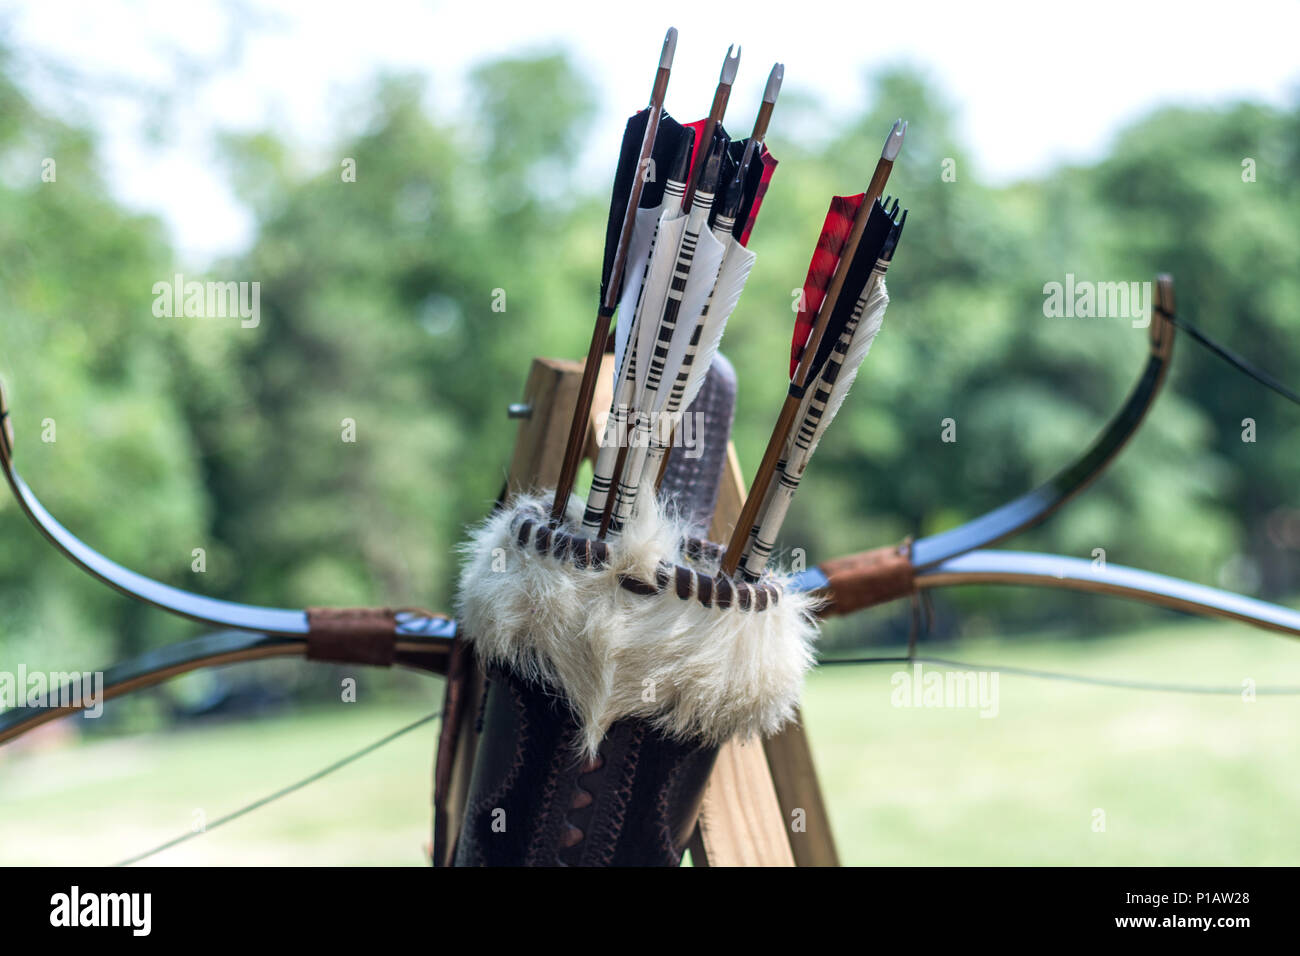 Medieval set of old wooden arrows in leather case and bows hanging on stand. Green forest blurred background. Close up, selective focus. Stock Photo